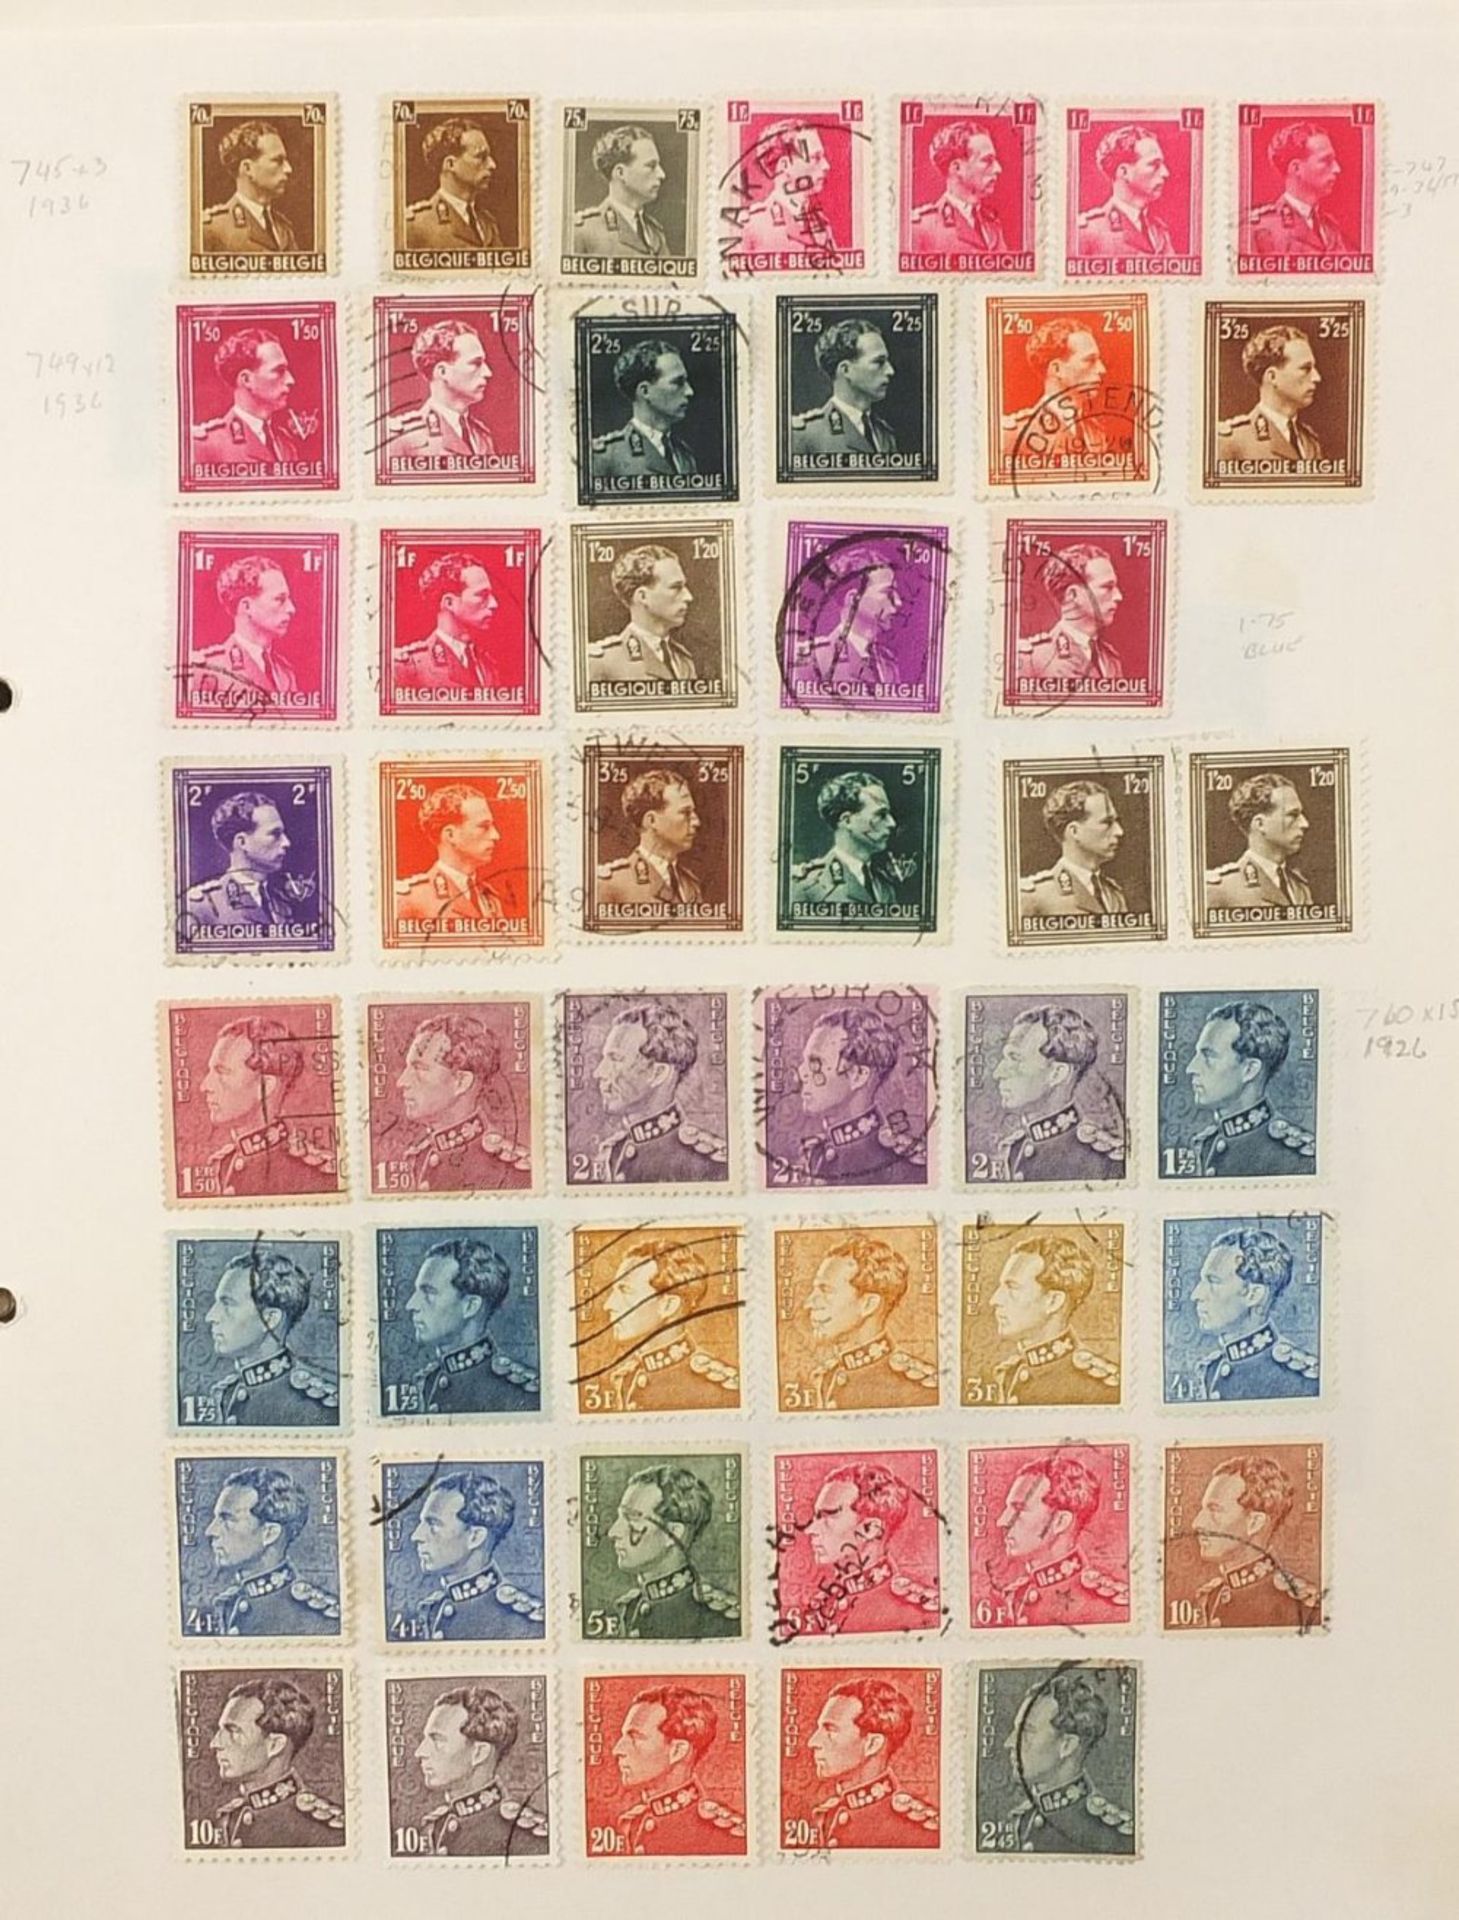 Extensive collection of antique and later world stamps arranged in albums including Brazil, - Image 43 of 52